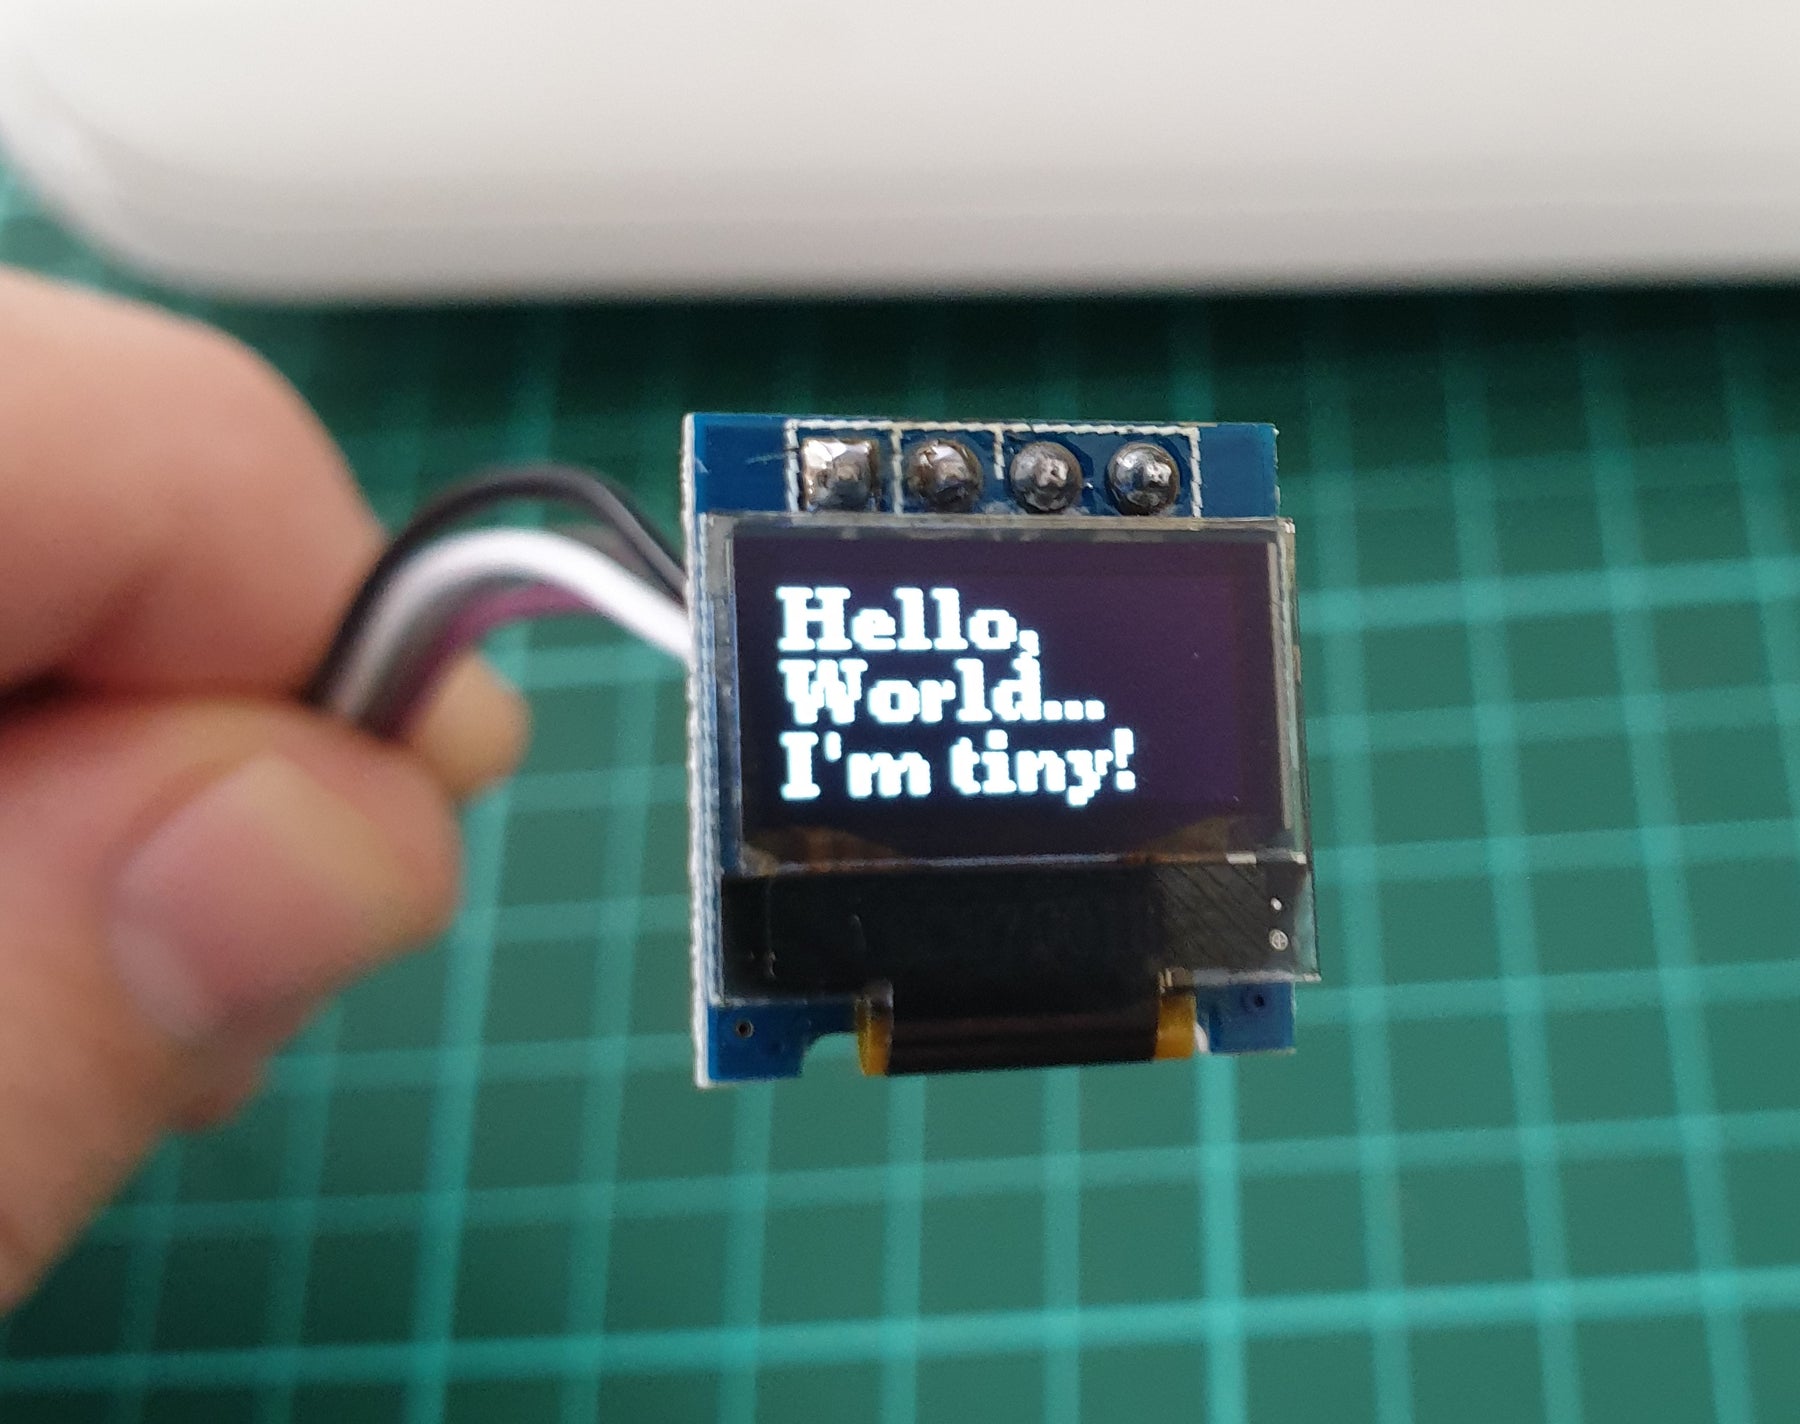 Tutorial - Using the 0.49" 64 x 32 Graphic I2C OLED Display with Arduino